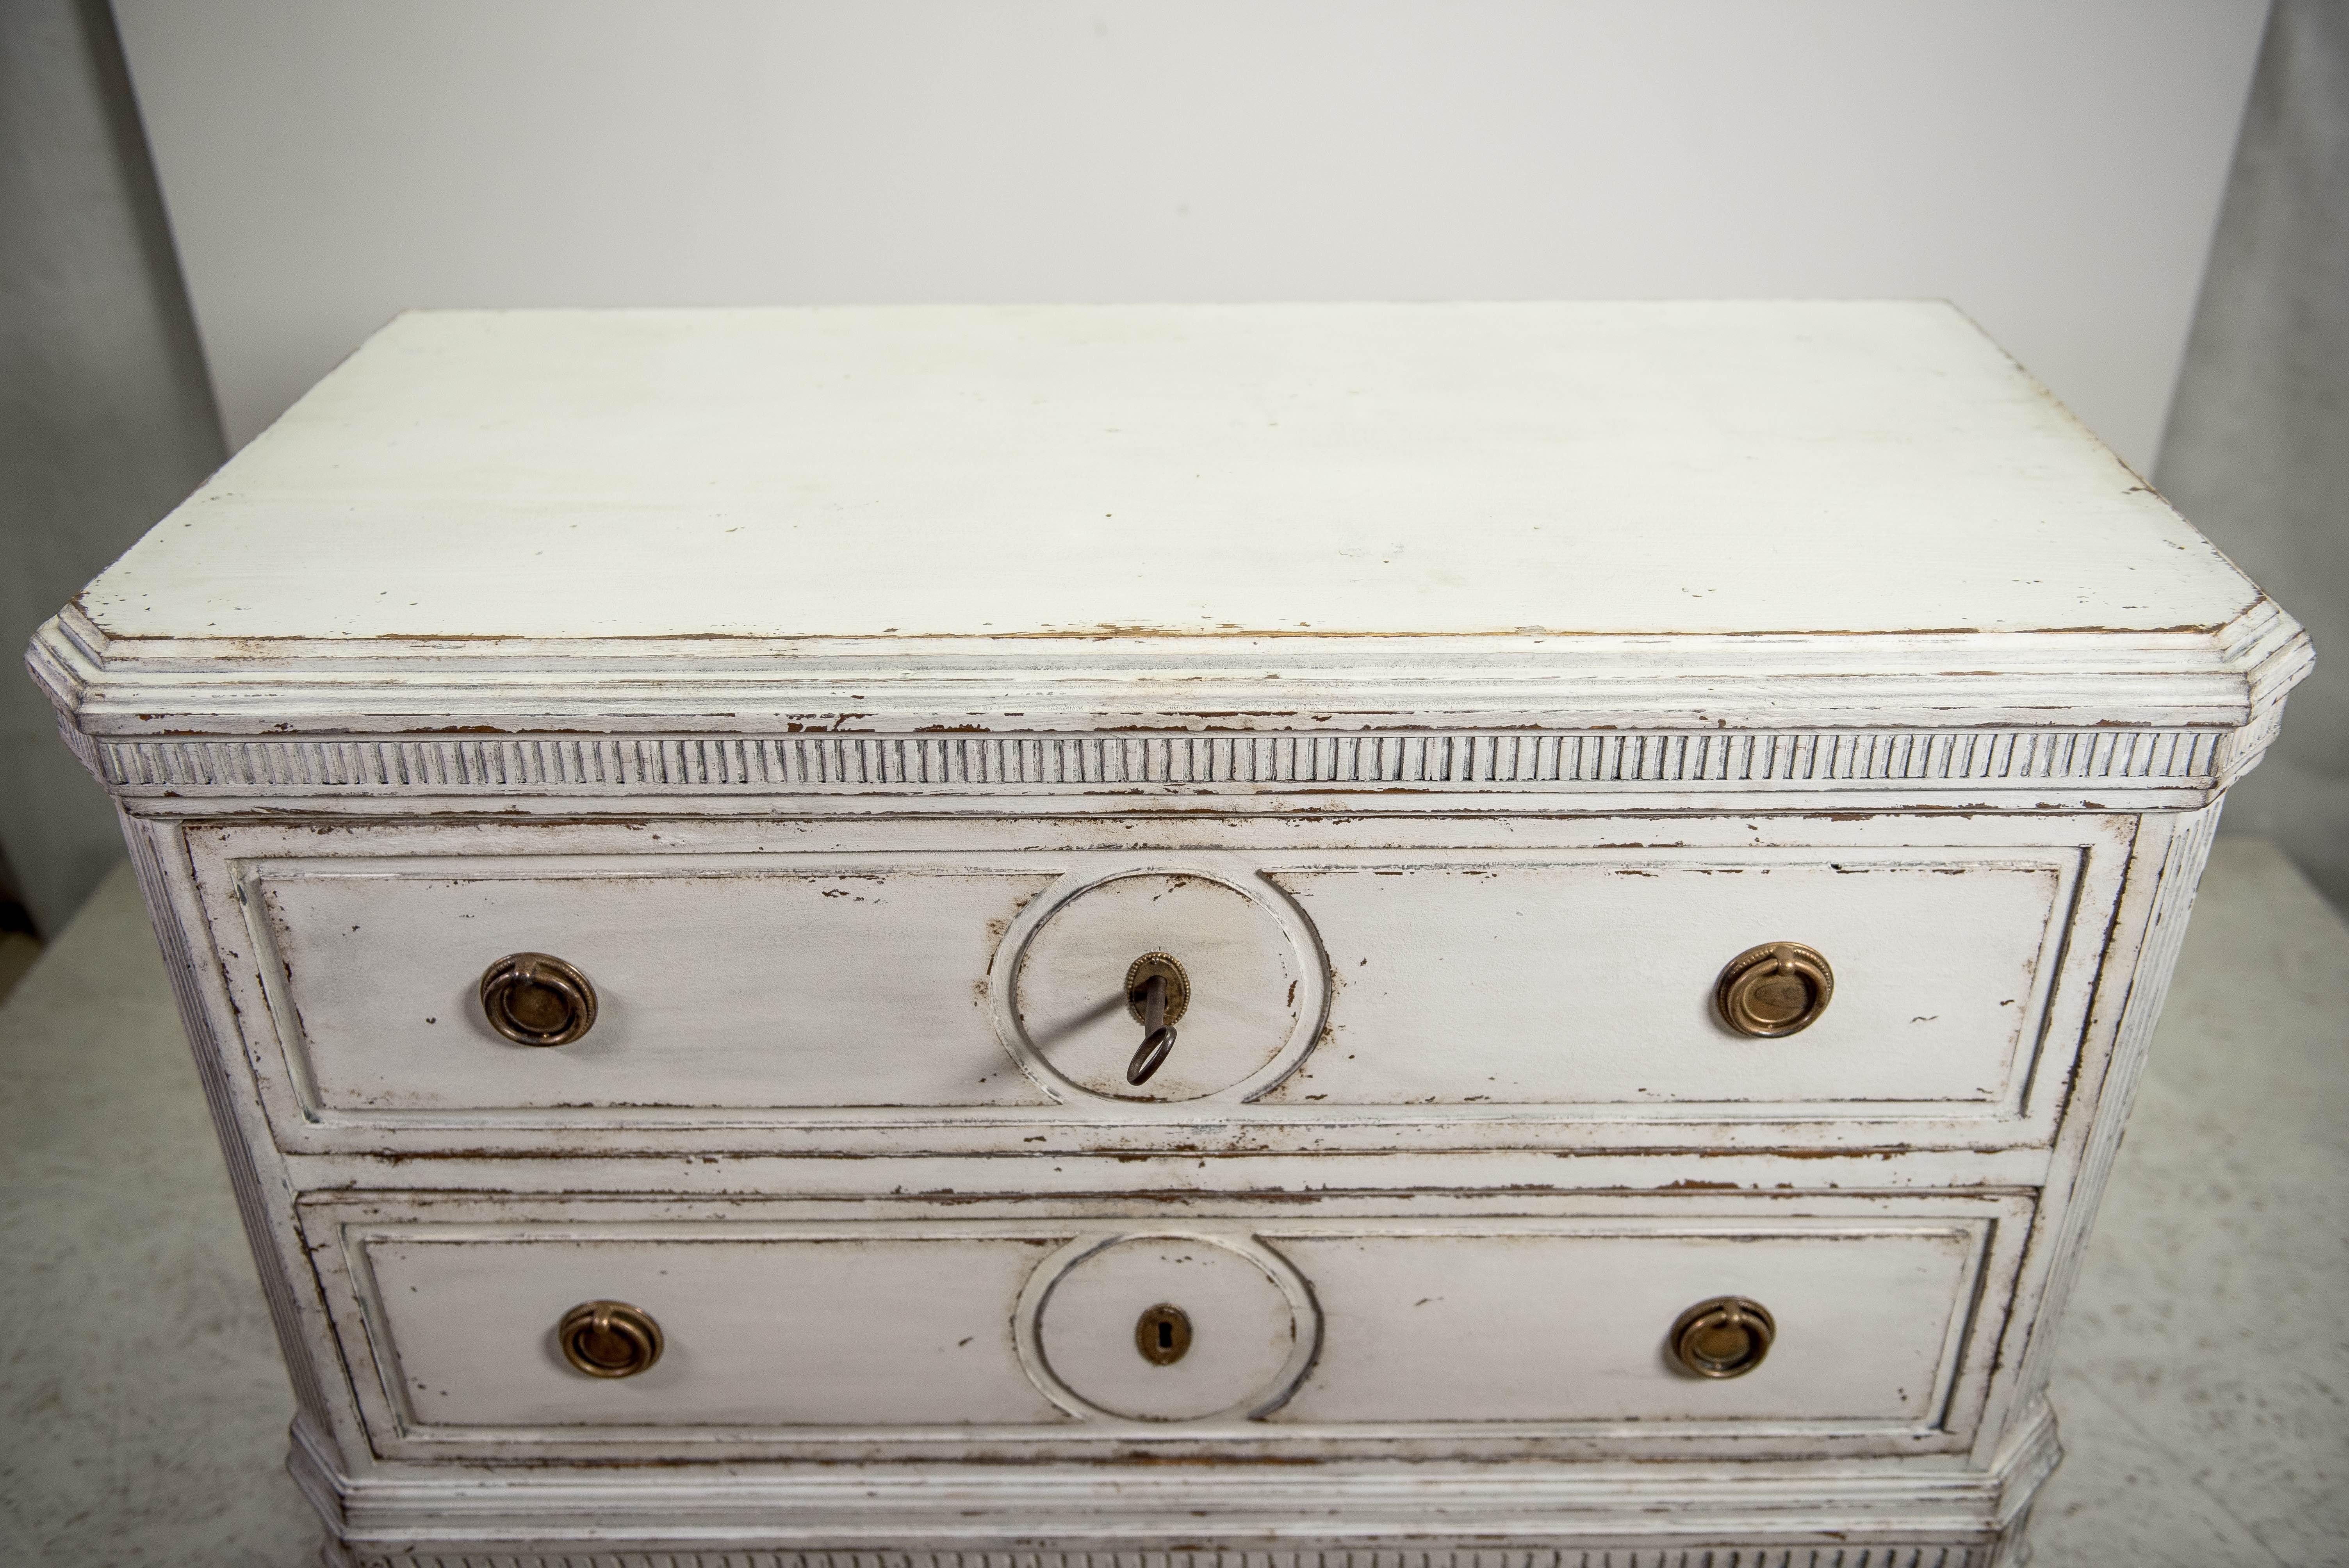 Circa 1870 beautiful antique Swedish Gustavian painted chest of drawers commode in Gustavian style with great circular detail and elegant legs. 

It is a very rare style and has 3 drawers in good working order with matching brass pull rings. Larger